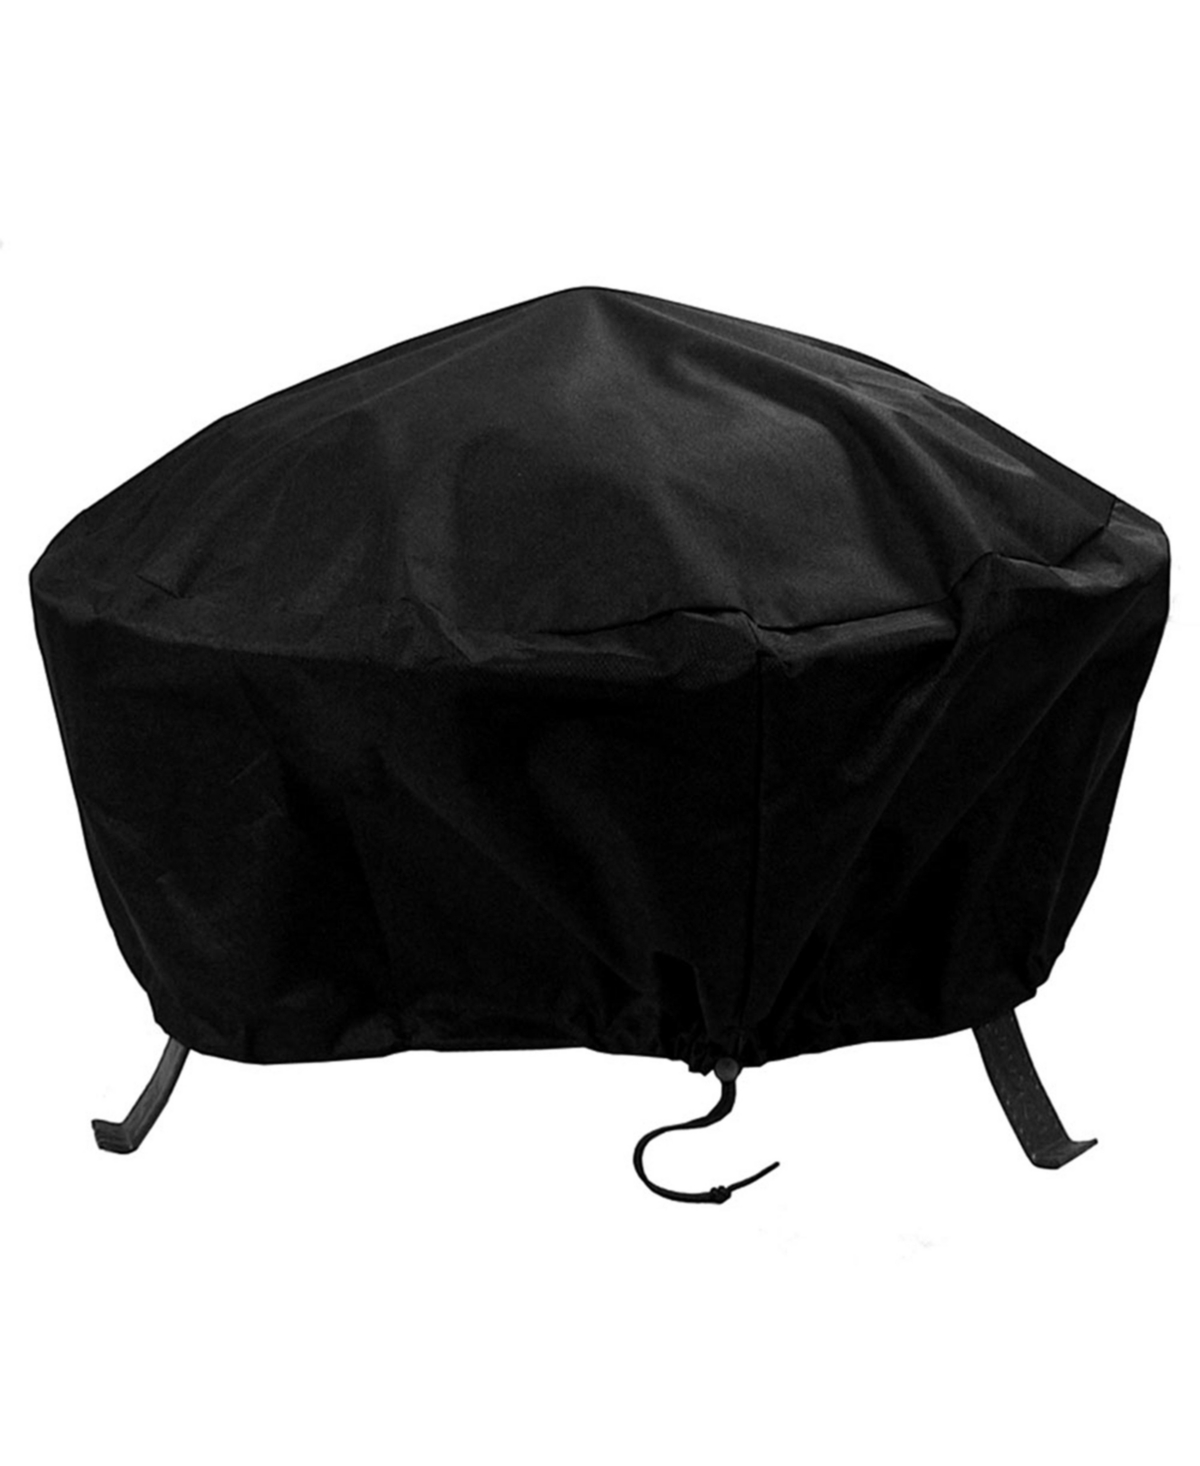 30 in Heavy-Duty Pvc Round Outdoor Fire Pit Cover - Black - Black